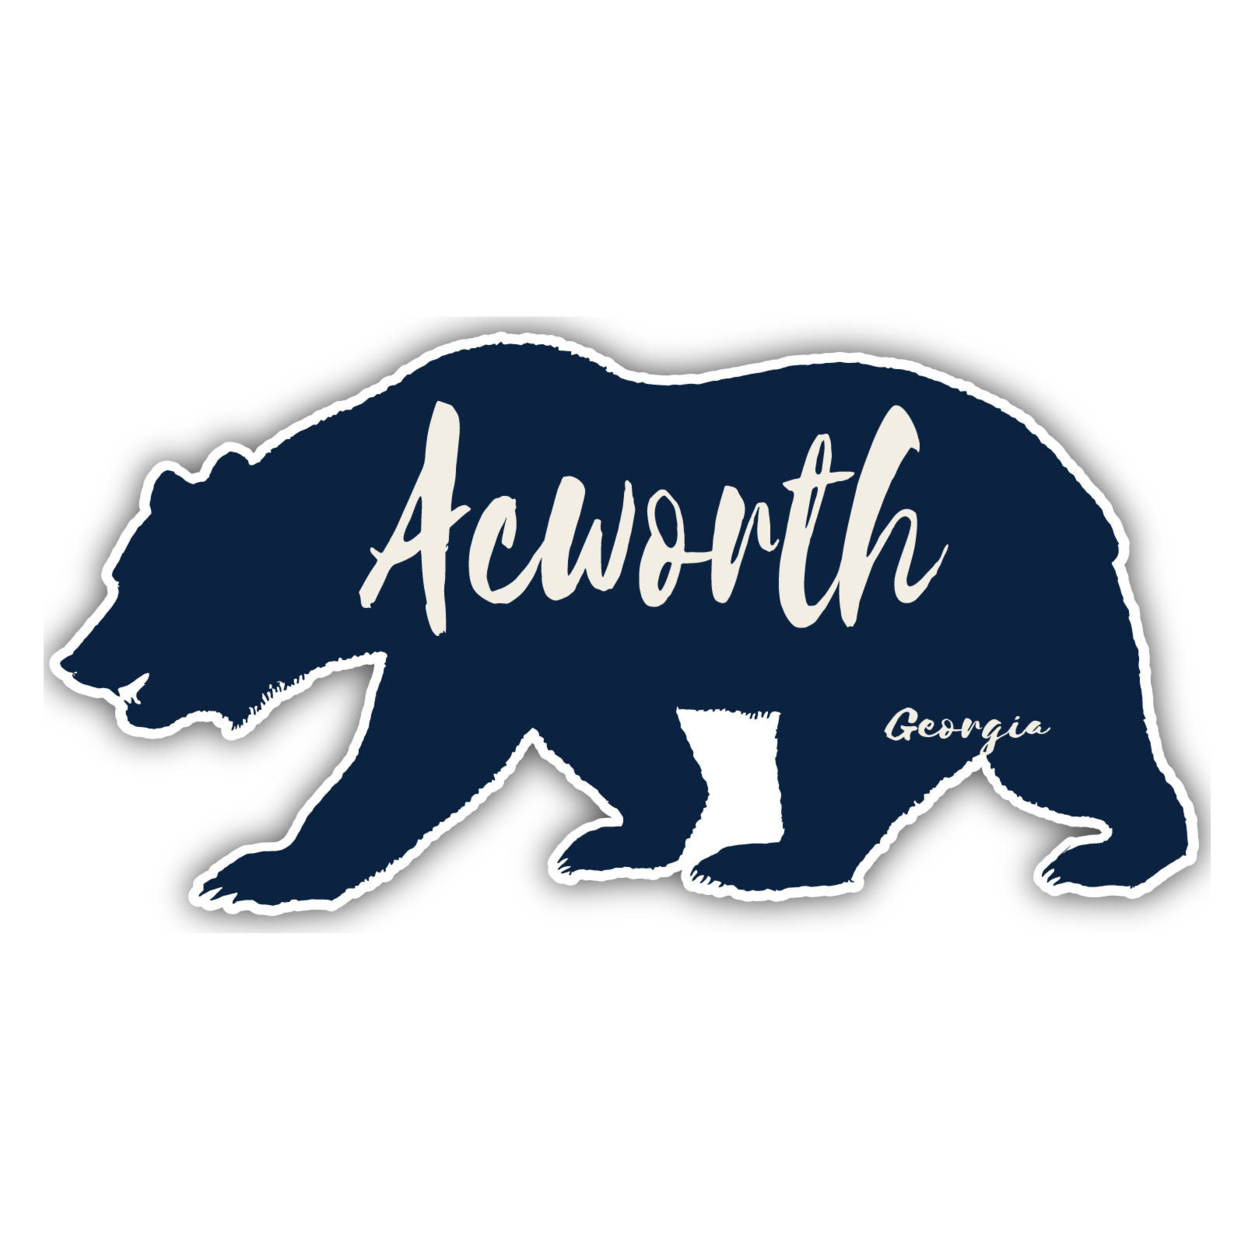 Acworth Georgia Souvenir Decorative Stickers (Choose Theme And Size) - 4-Pack, 6-Inch, Great Outdoors